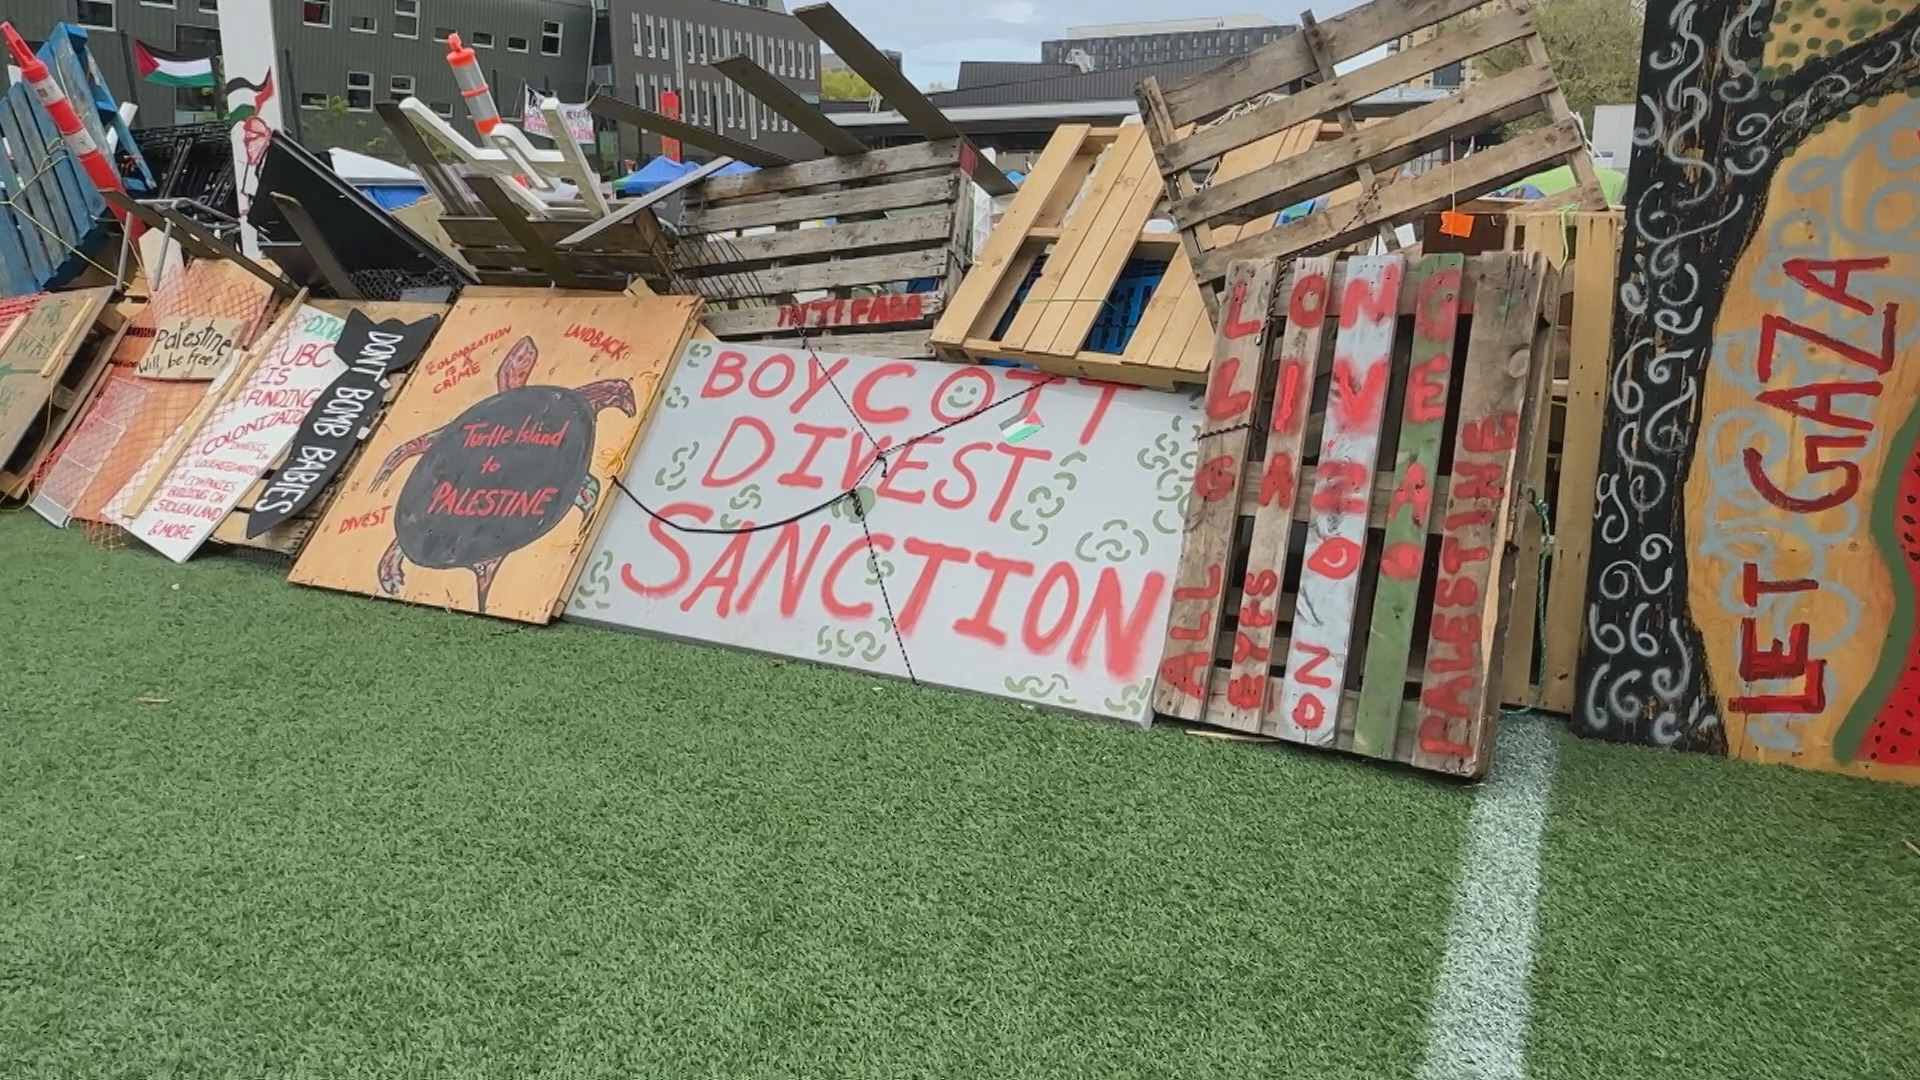 UBC considering legal options after pro-Palestinian protesters occupy campus bookstore